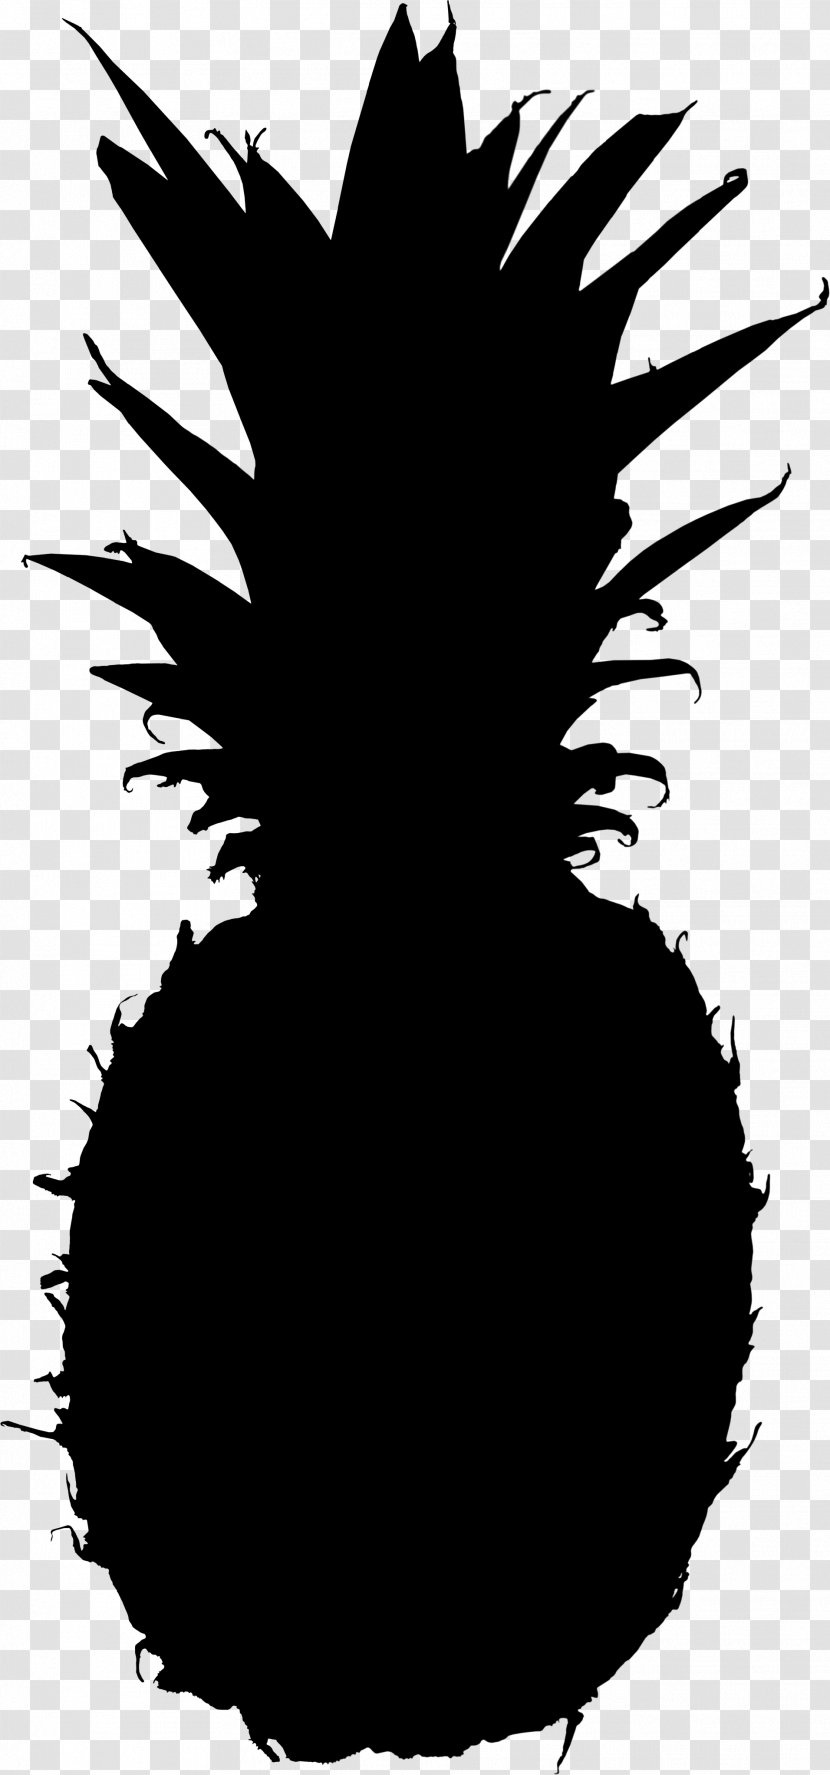 Clip Art Silhouette Vector Graphics Image - Pineapple Transparent PNG